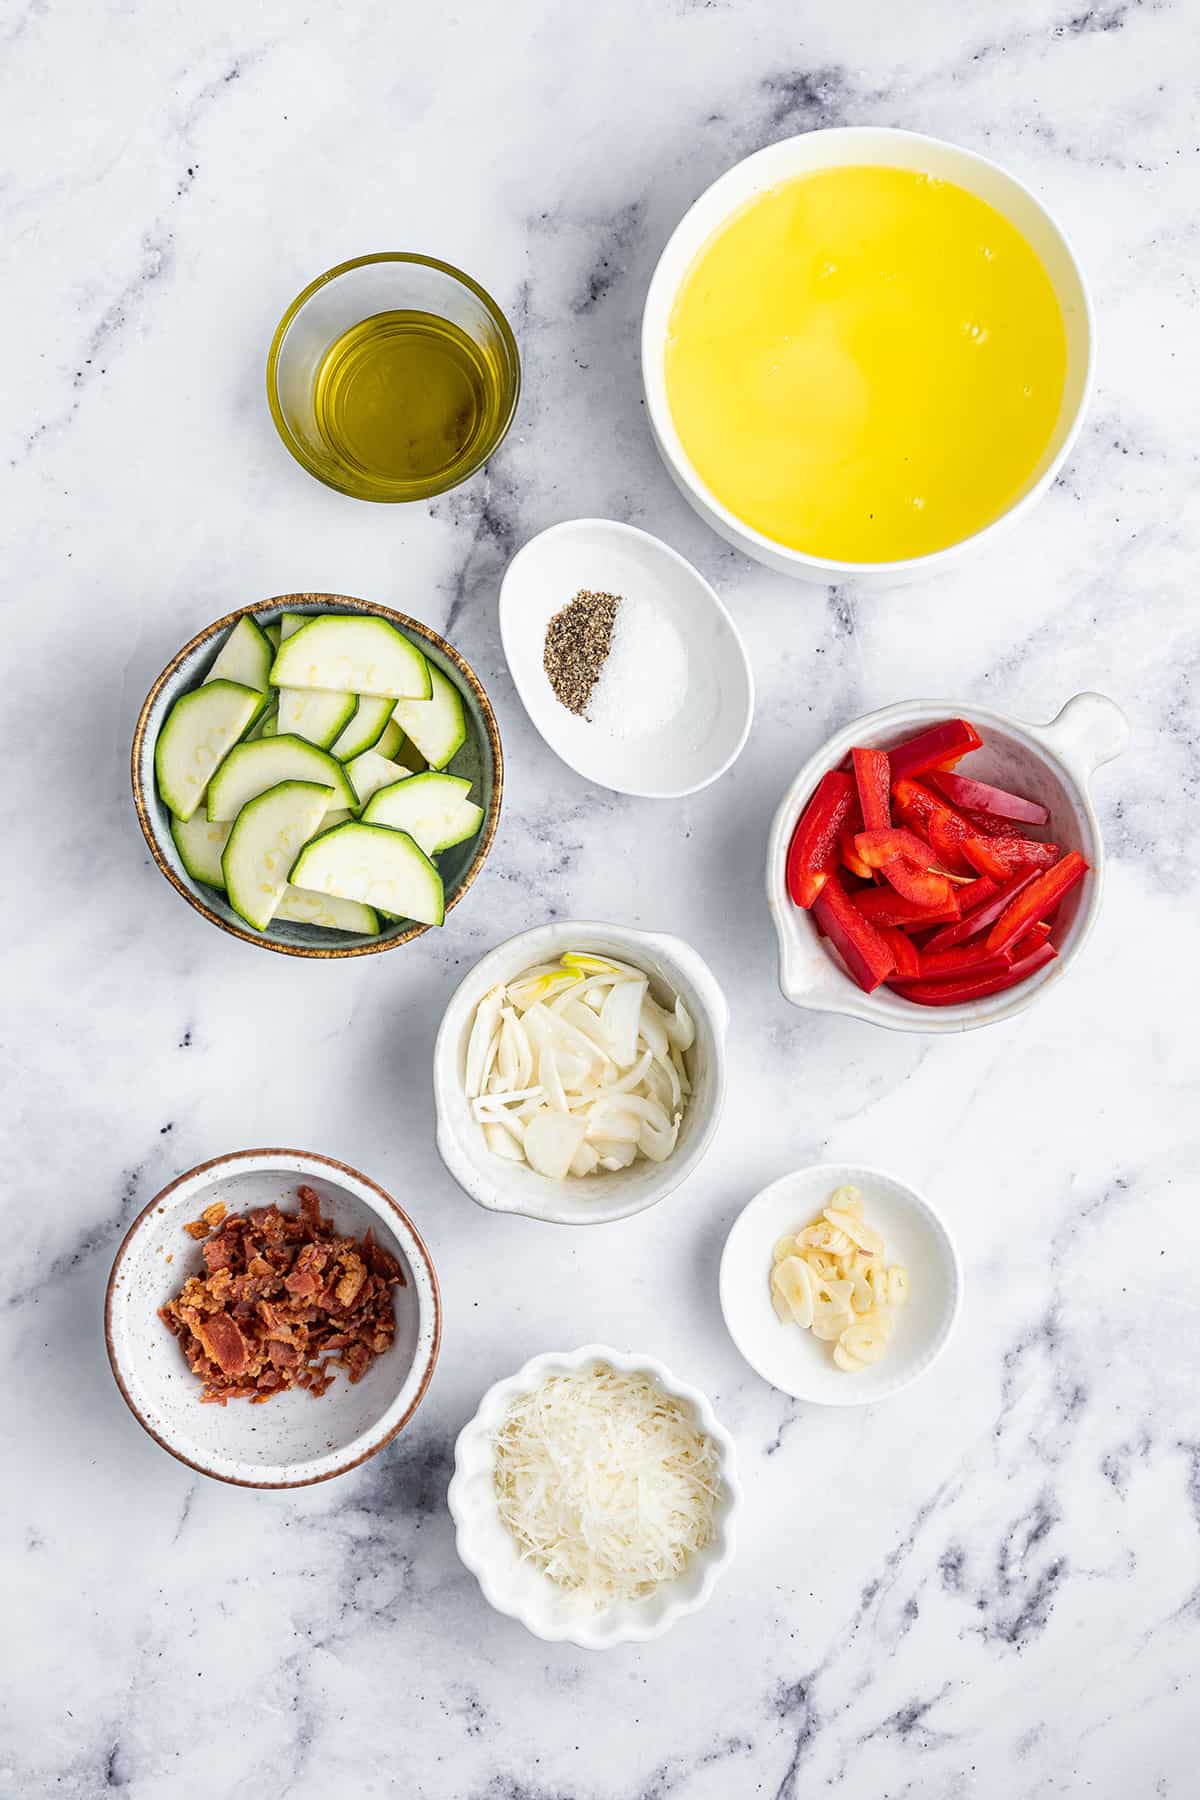 Overhead view of the ingredients needed to make egg white omelets: a bowl of egg whites, a bowl of oil, a bowl of salt and pepper, a bowl of onions, a bowl of garlic, a bowl of bell peppers, a bowl of zucchini, a bowl of bacon, and a bowl of parmesan cheese.